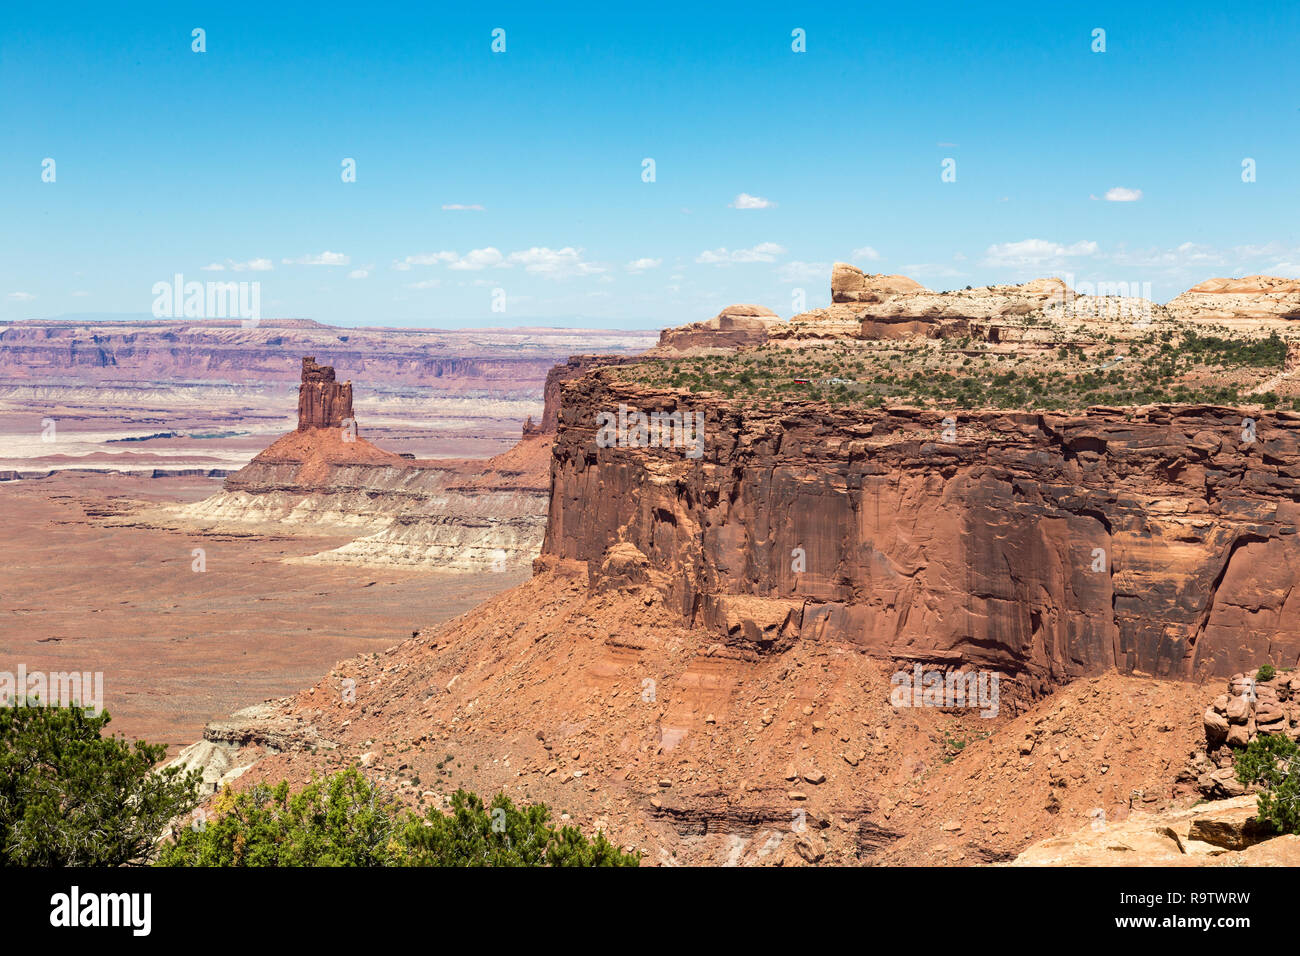 Canyonlands National Park in southeastern Utah is known for its dramatic desert landscape carved by the Colorado River. Island in the Sky is a huge, f Stock Photo